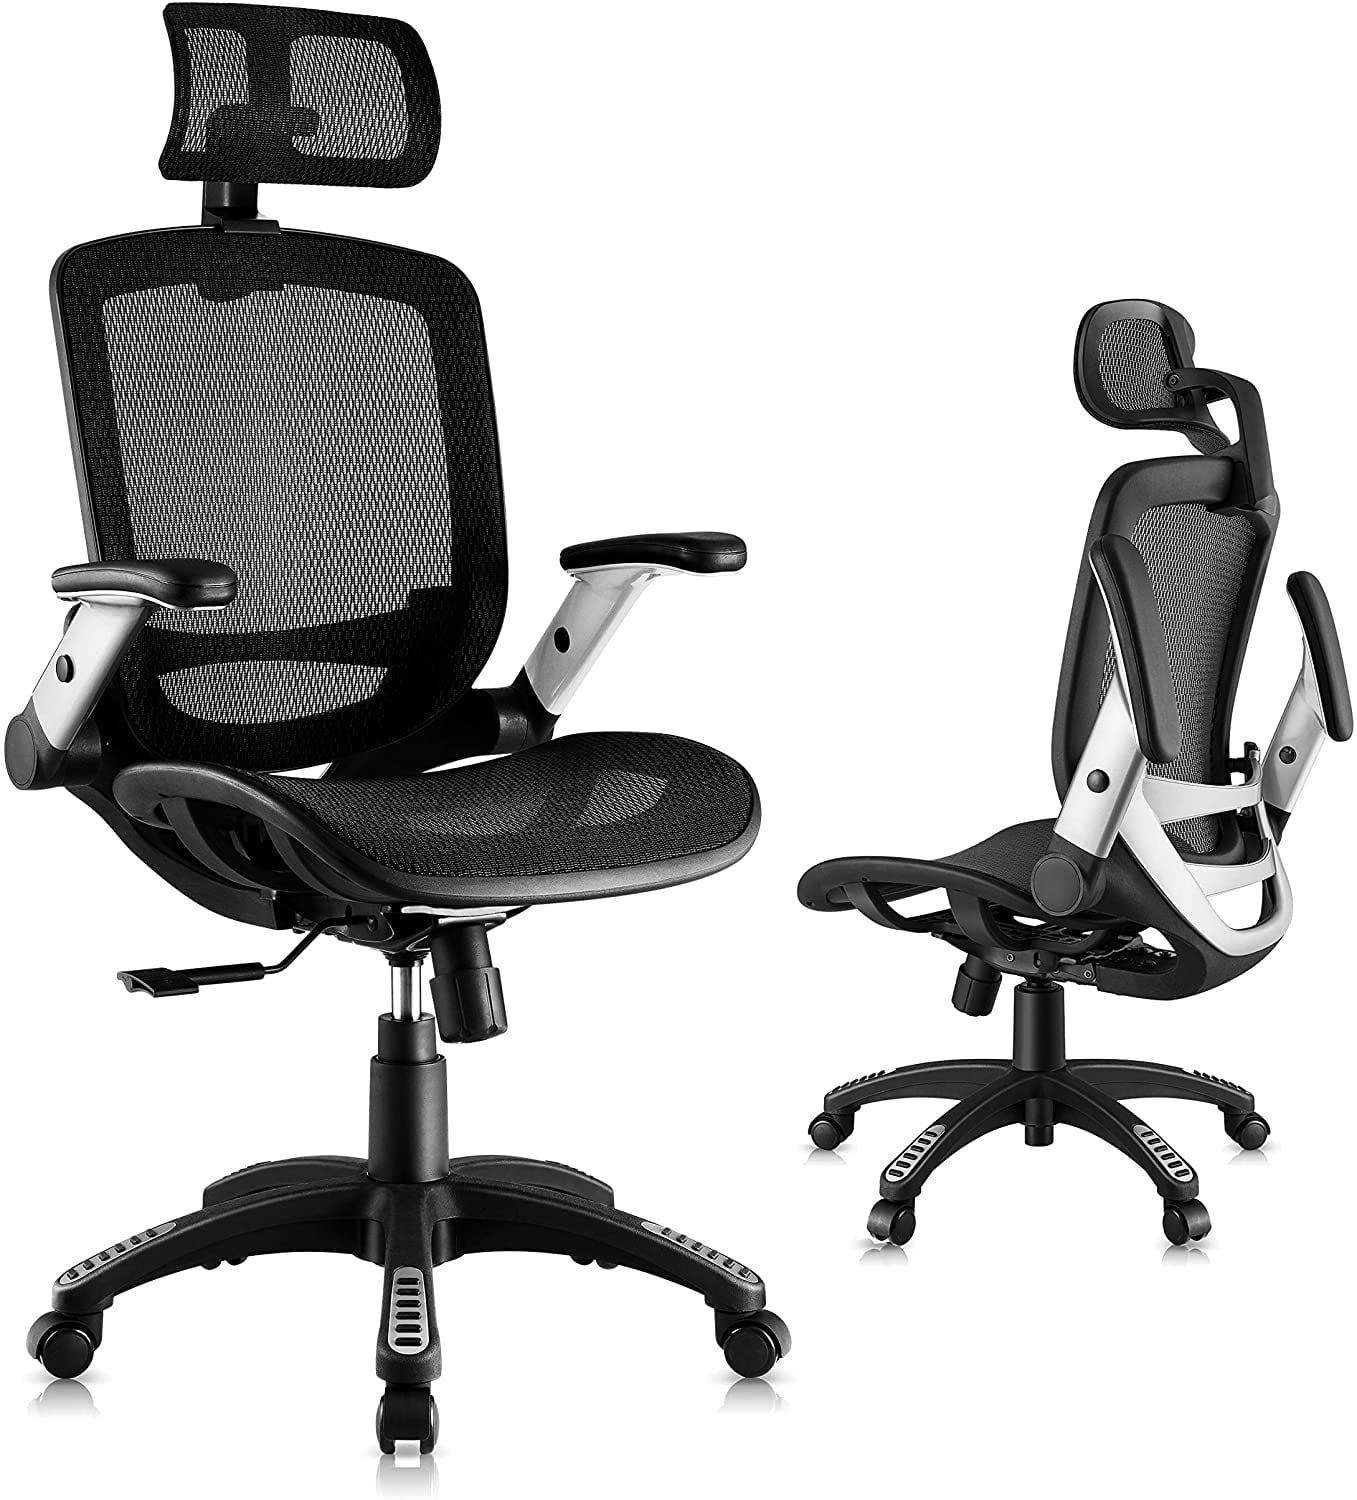 Ergonomic Office Chair Mesh Computer Chair with Lumbar Support and Armrest Swivel Chair Rolling Adjustable Desk Chair,Black